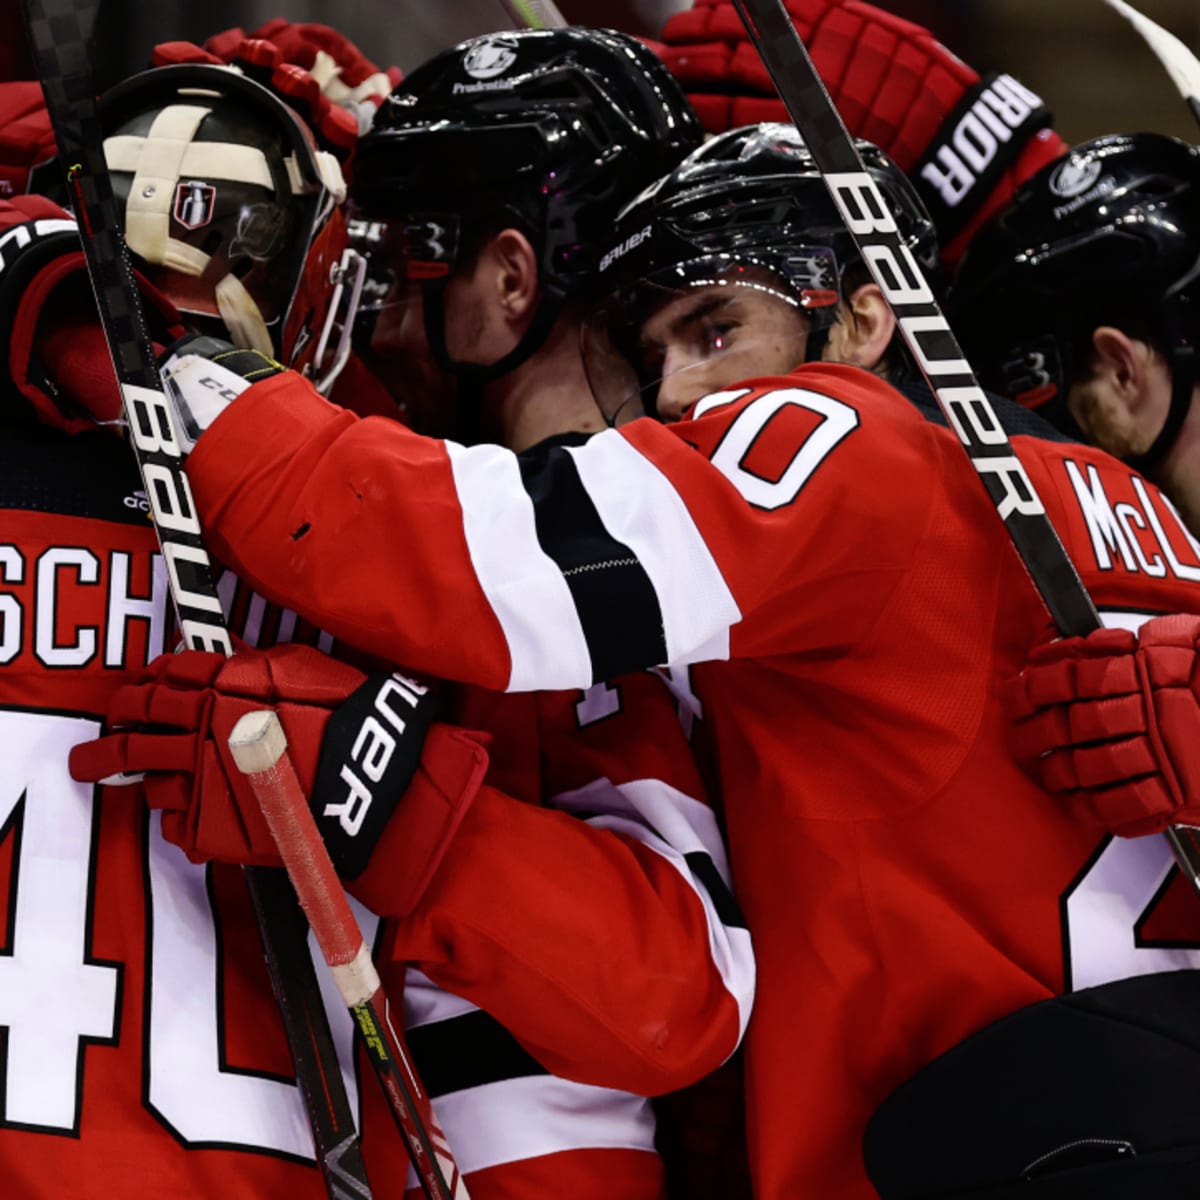 Devils Trounce Rangers in Game 7, Win First Playoff Series Since